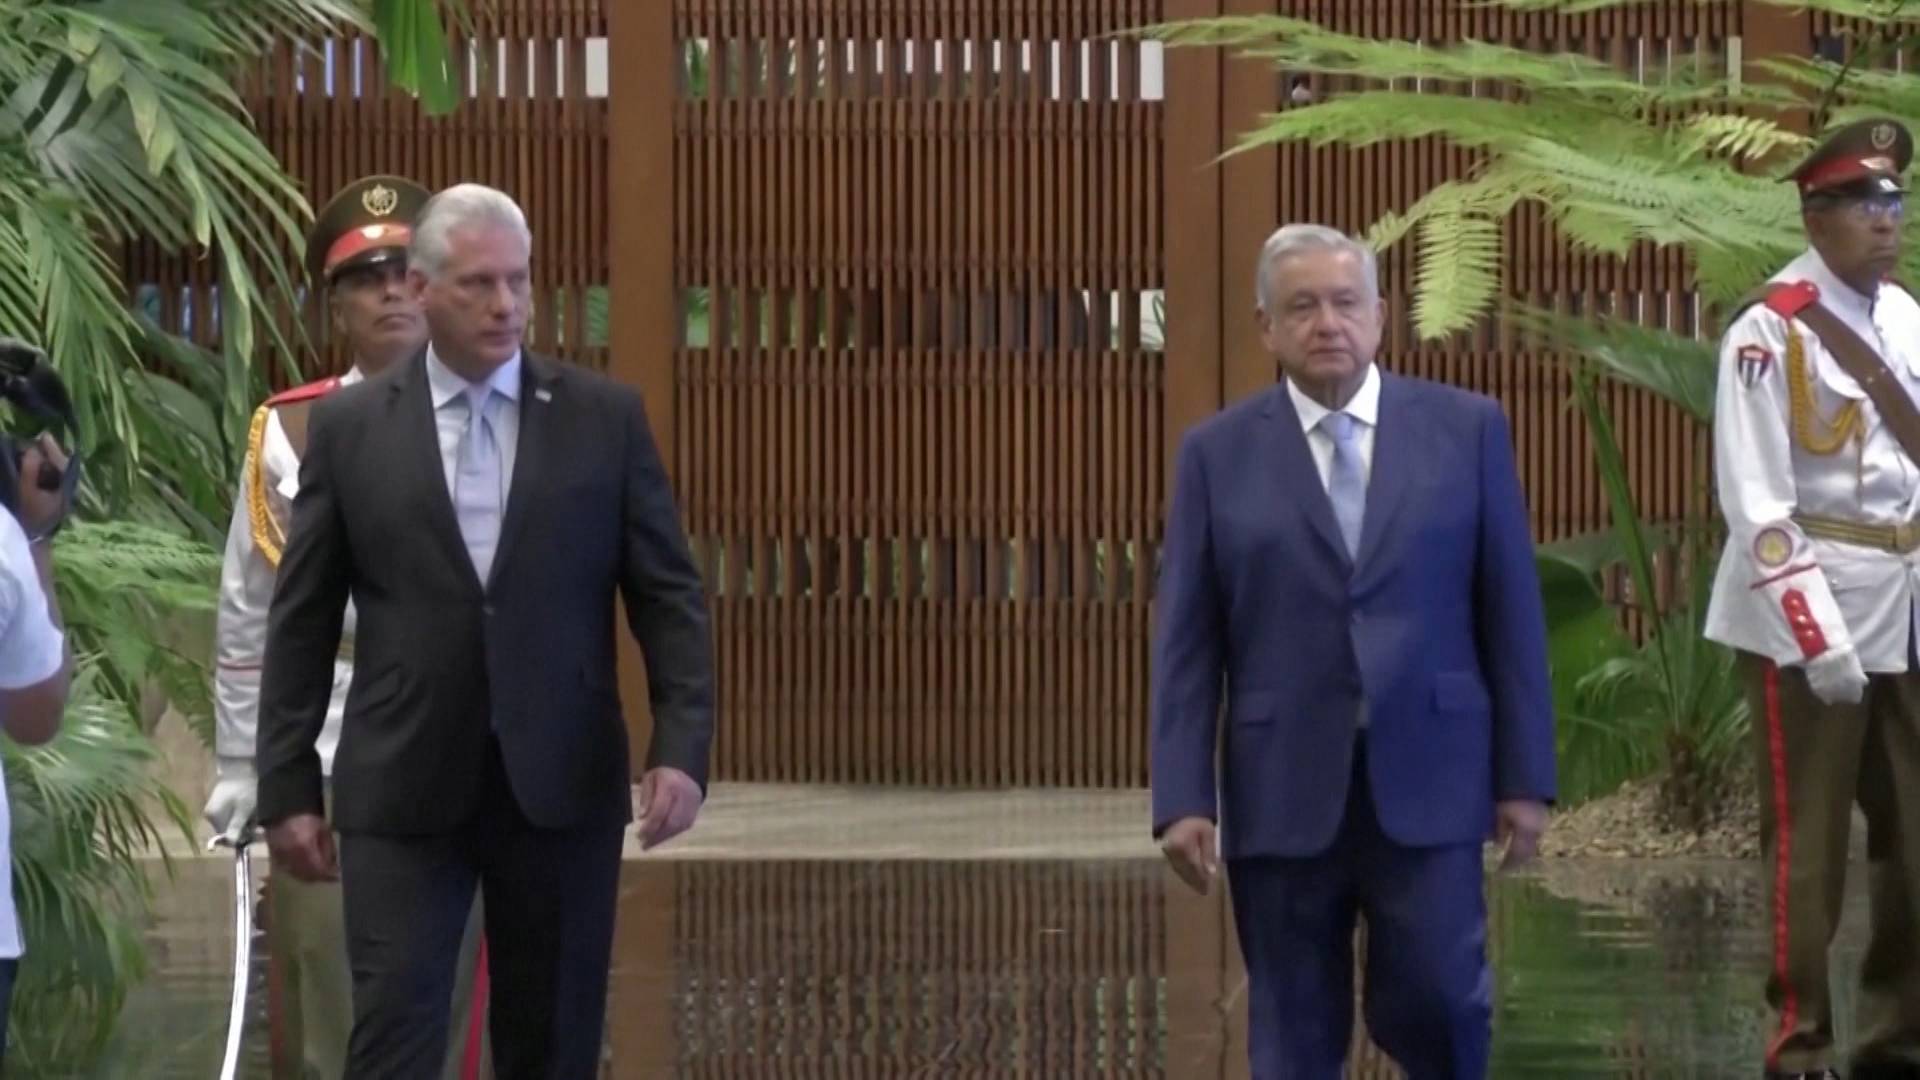 Mexico's AMLO Says U.S. Should Not Exclude Other Nations from Summit of the Americas